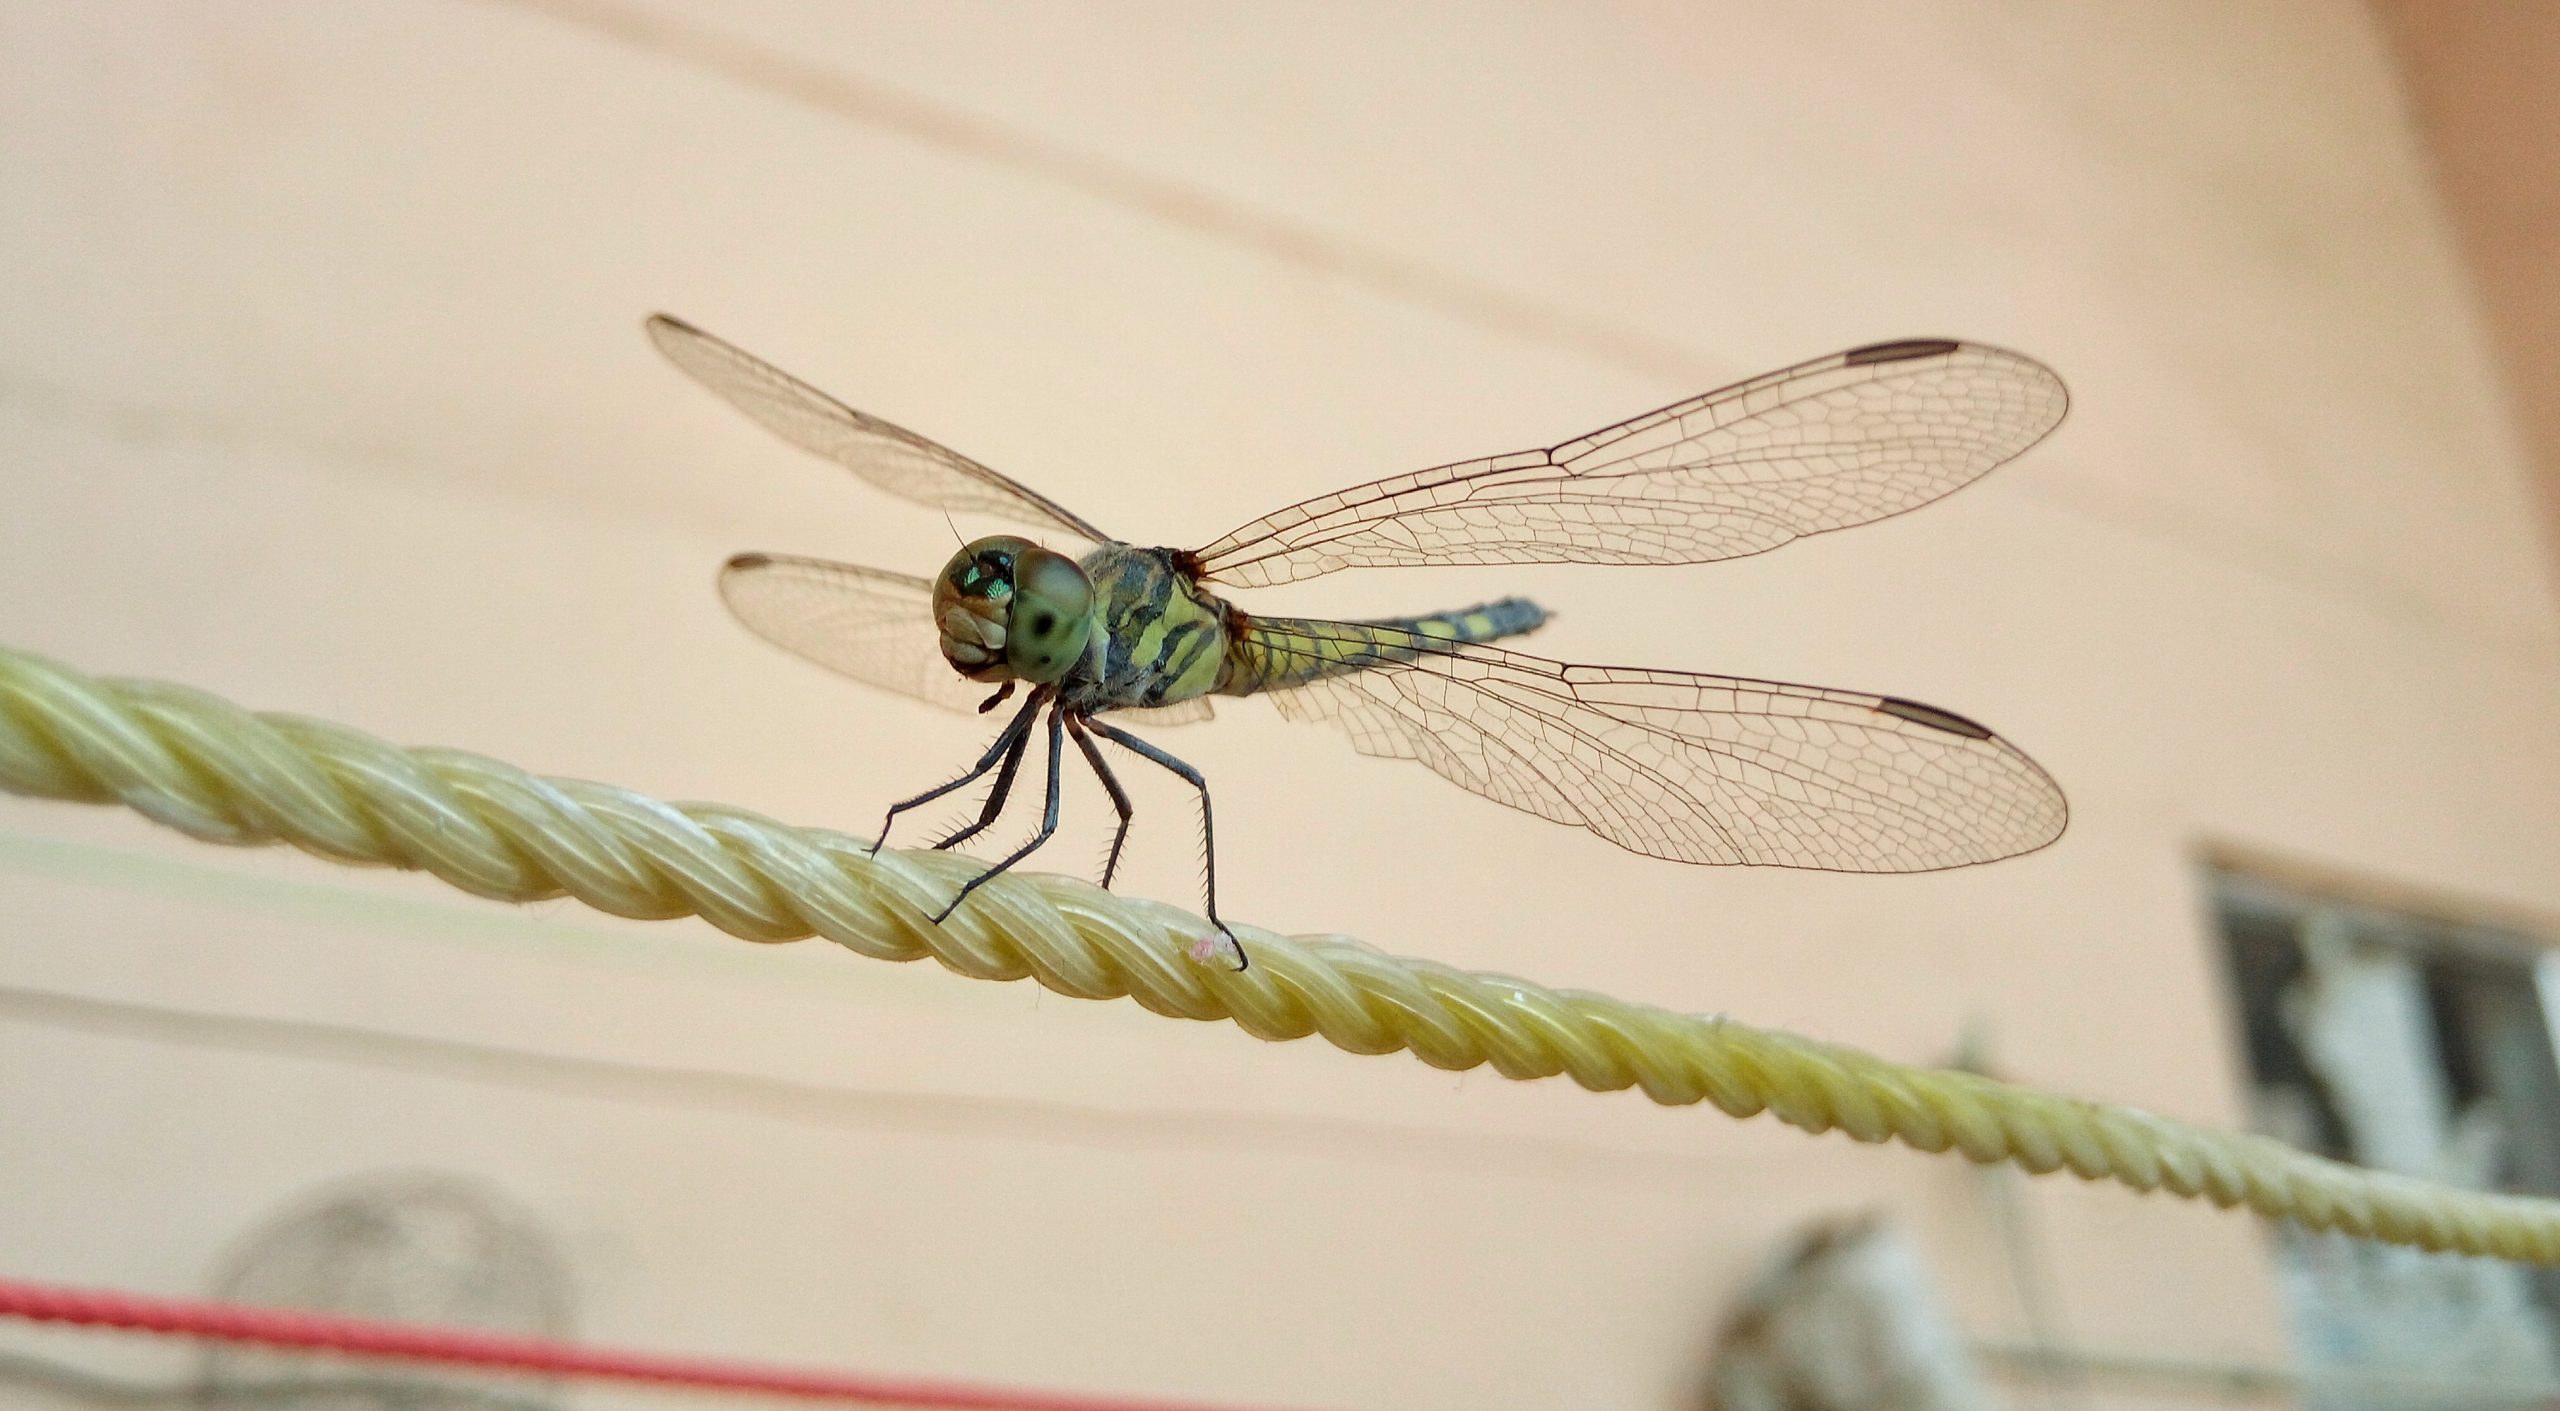 Dragonfly Close-up